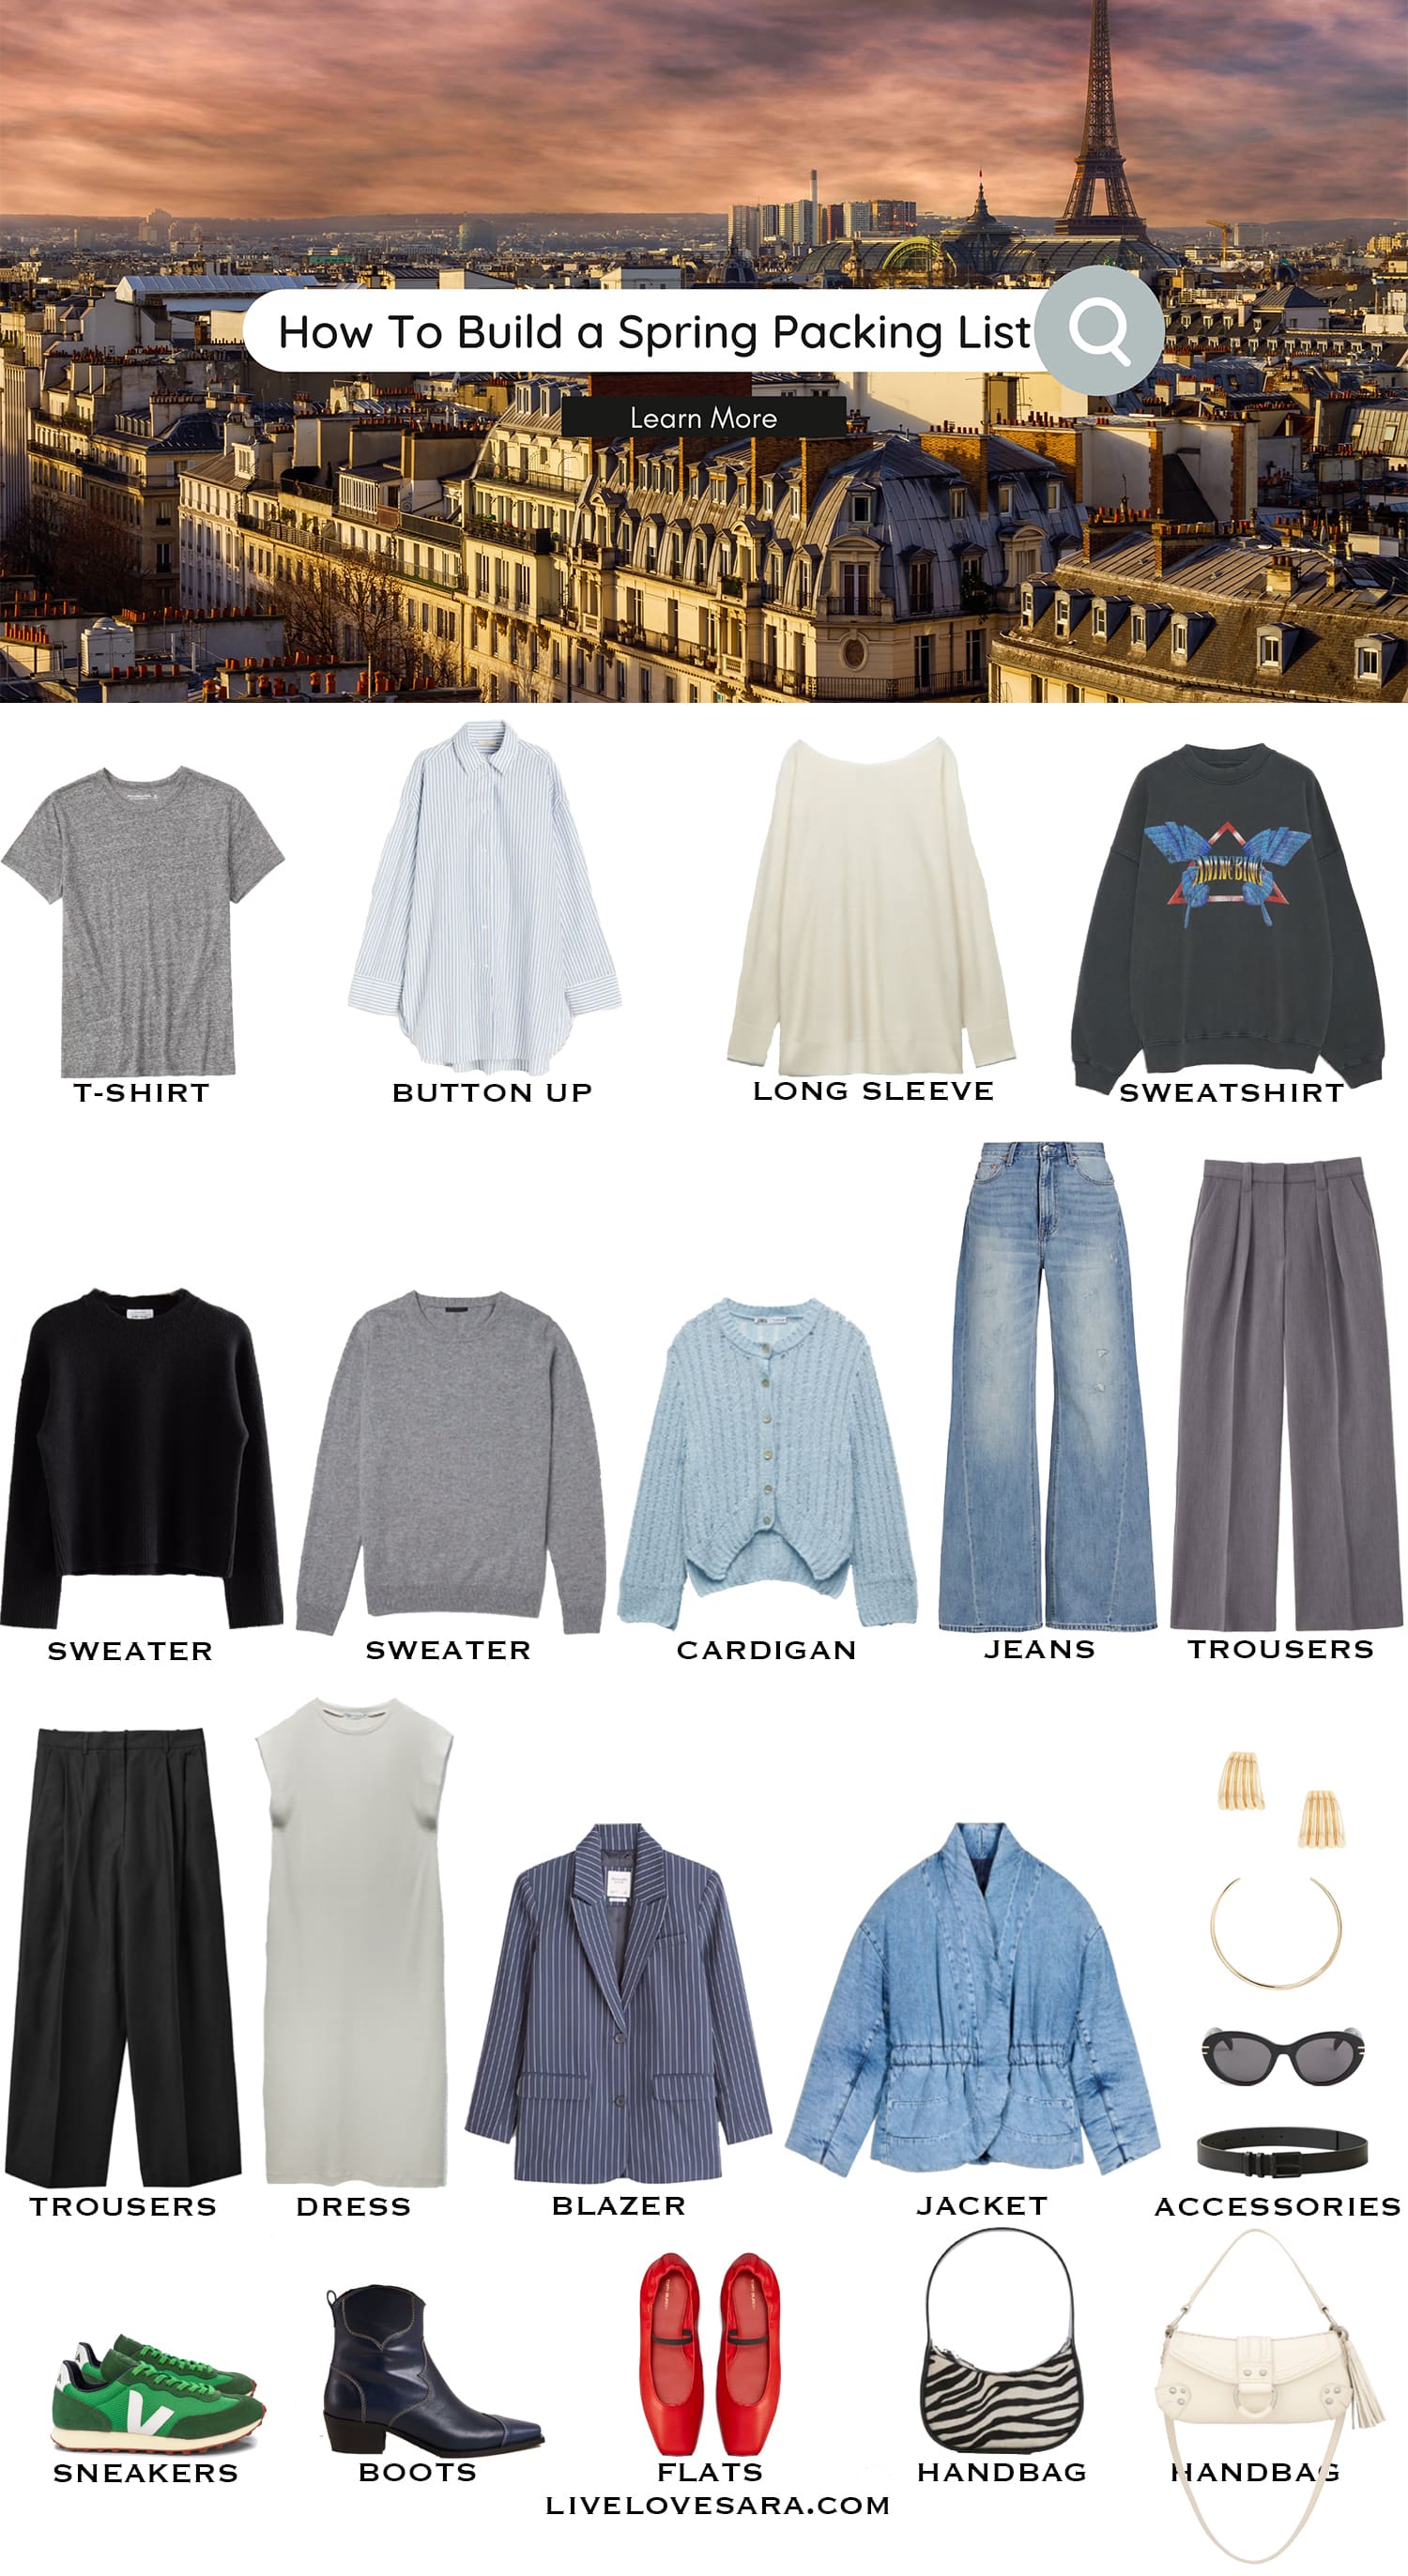 A White background with an image at the top of Paris rooftops and the Eiffel Tower. Underneath are 22 pieces including clothes, shoes, and accessories to pack for the Ultimate Spring Packing List.